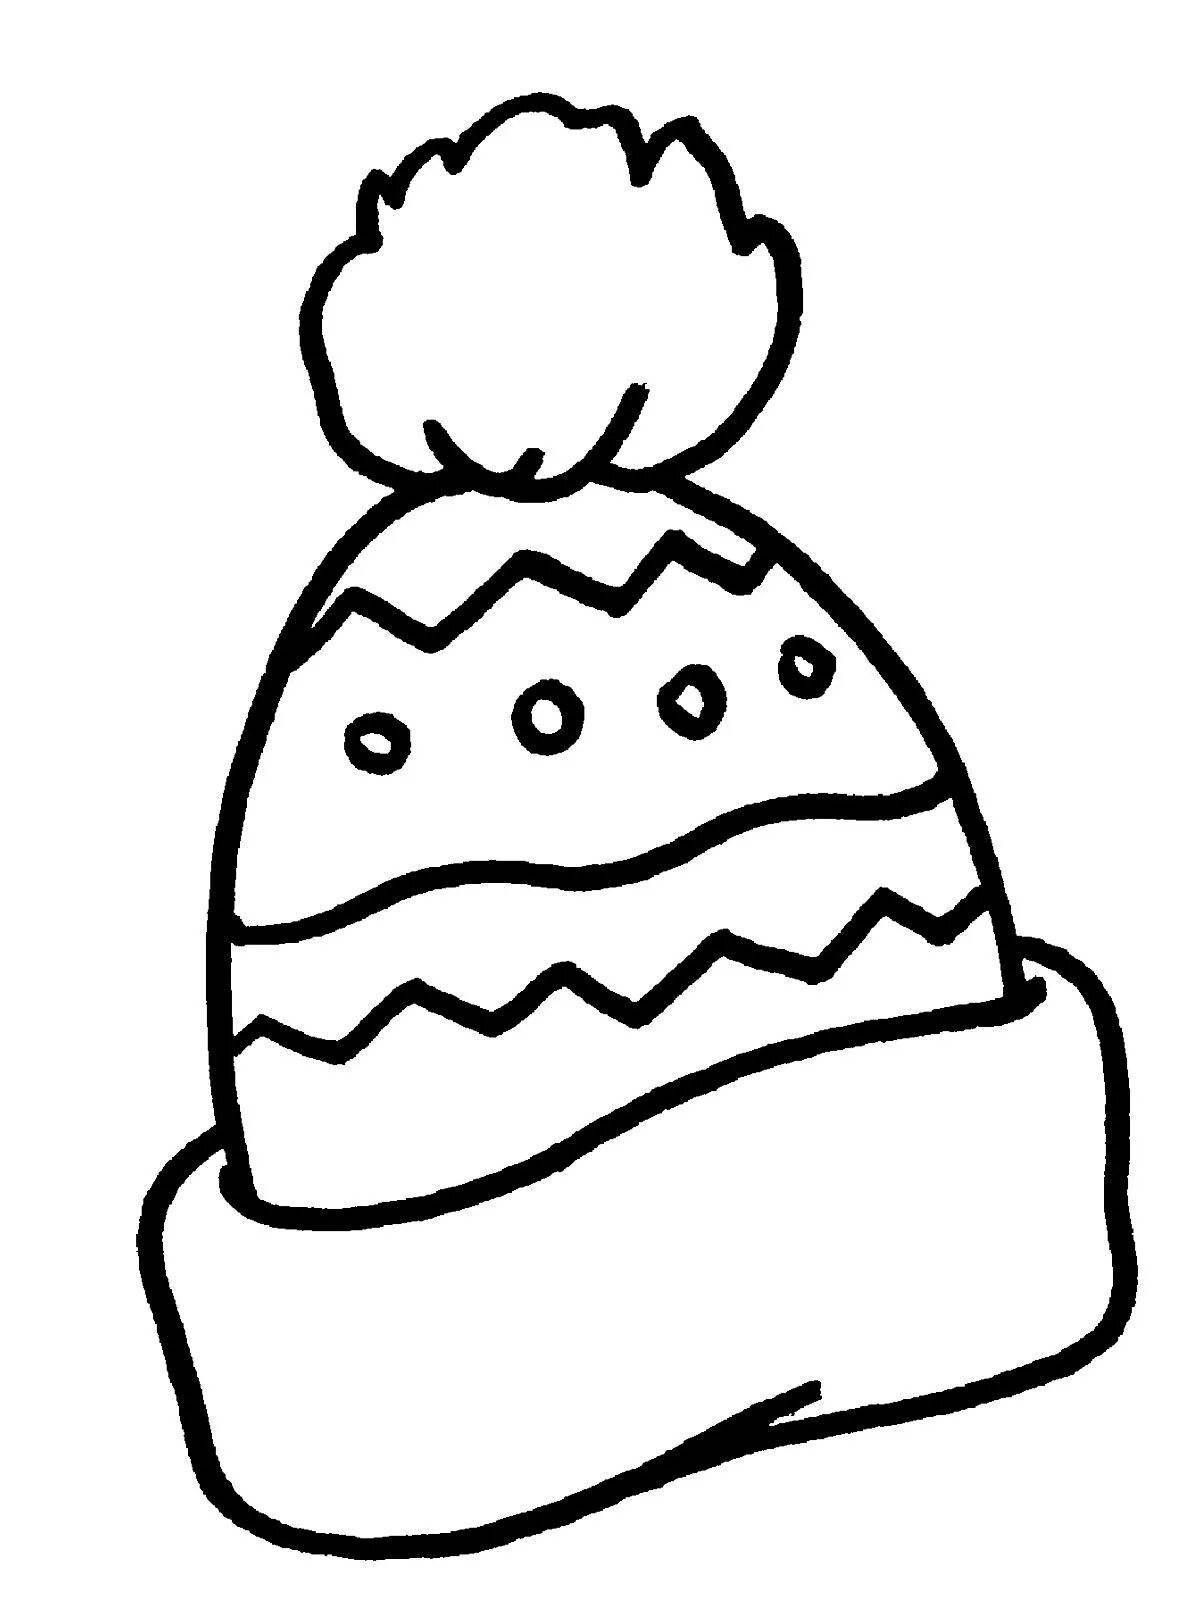 Attractive hat coloring template